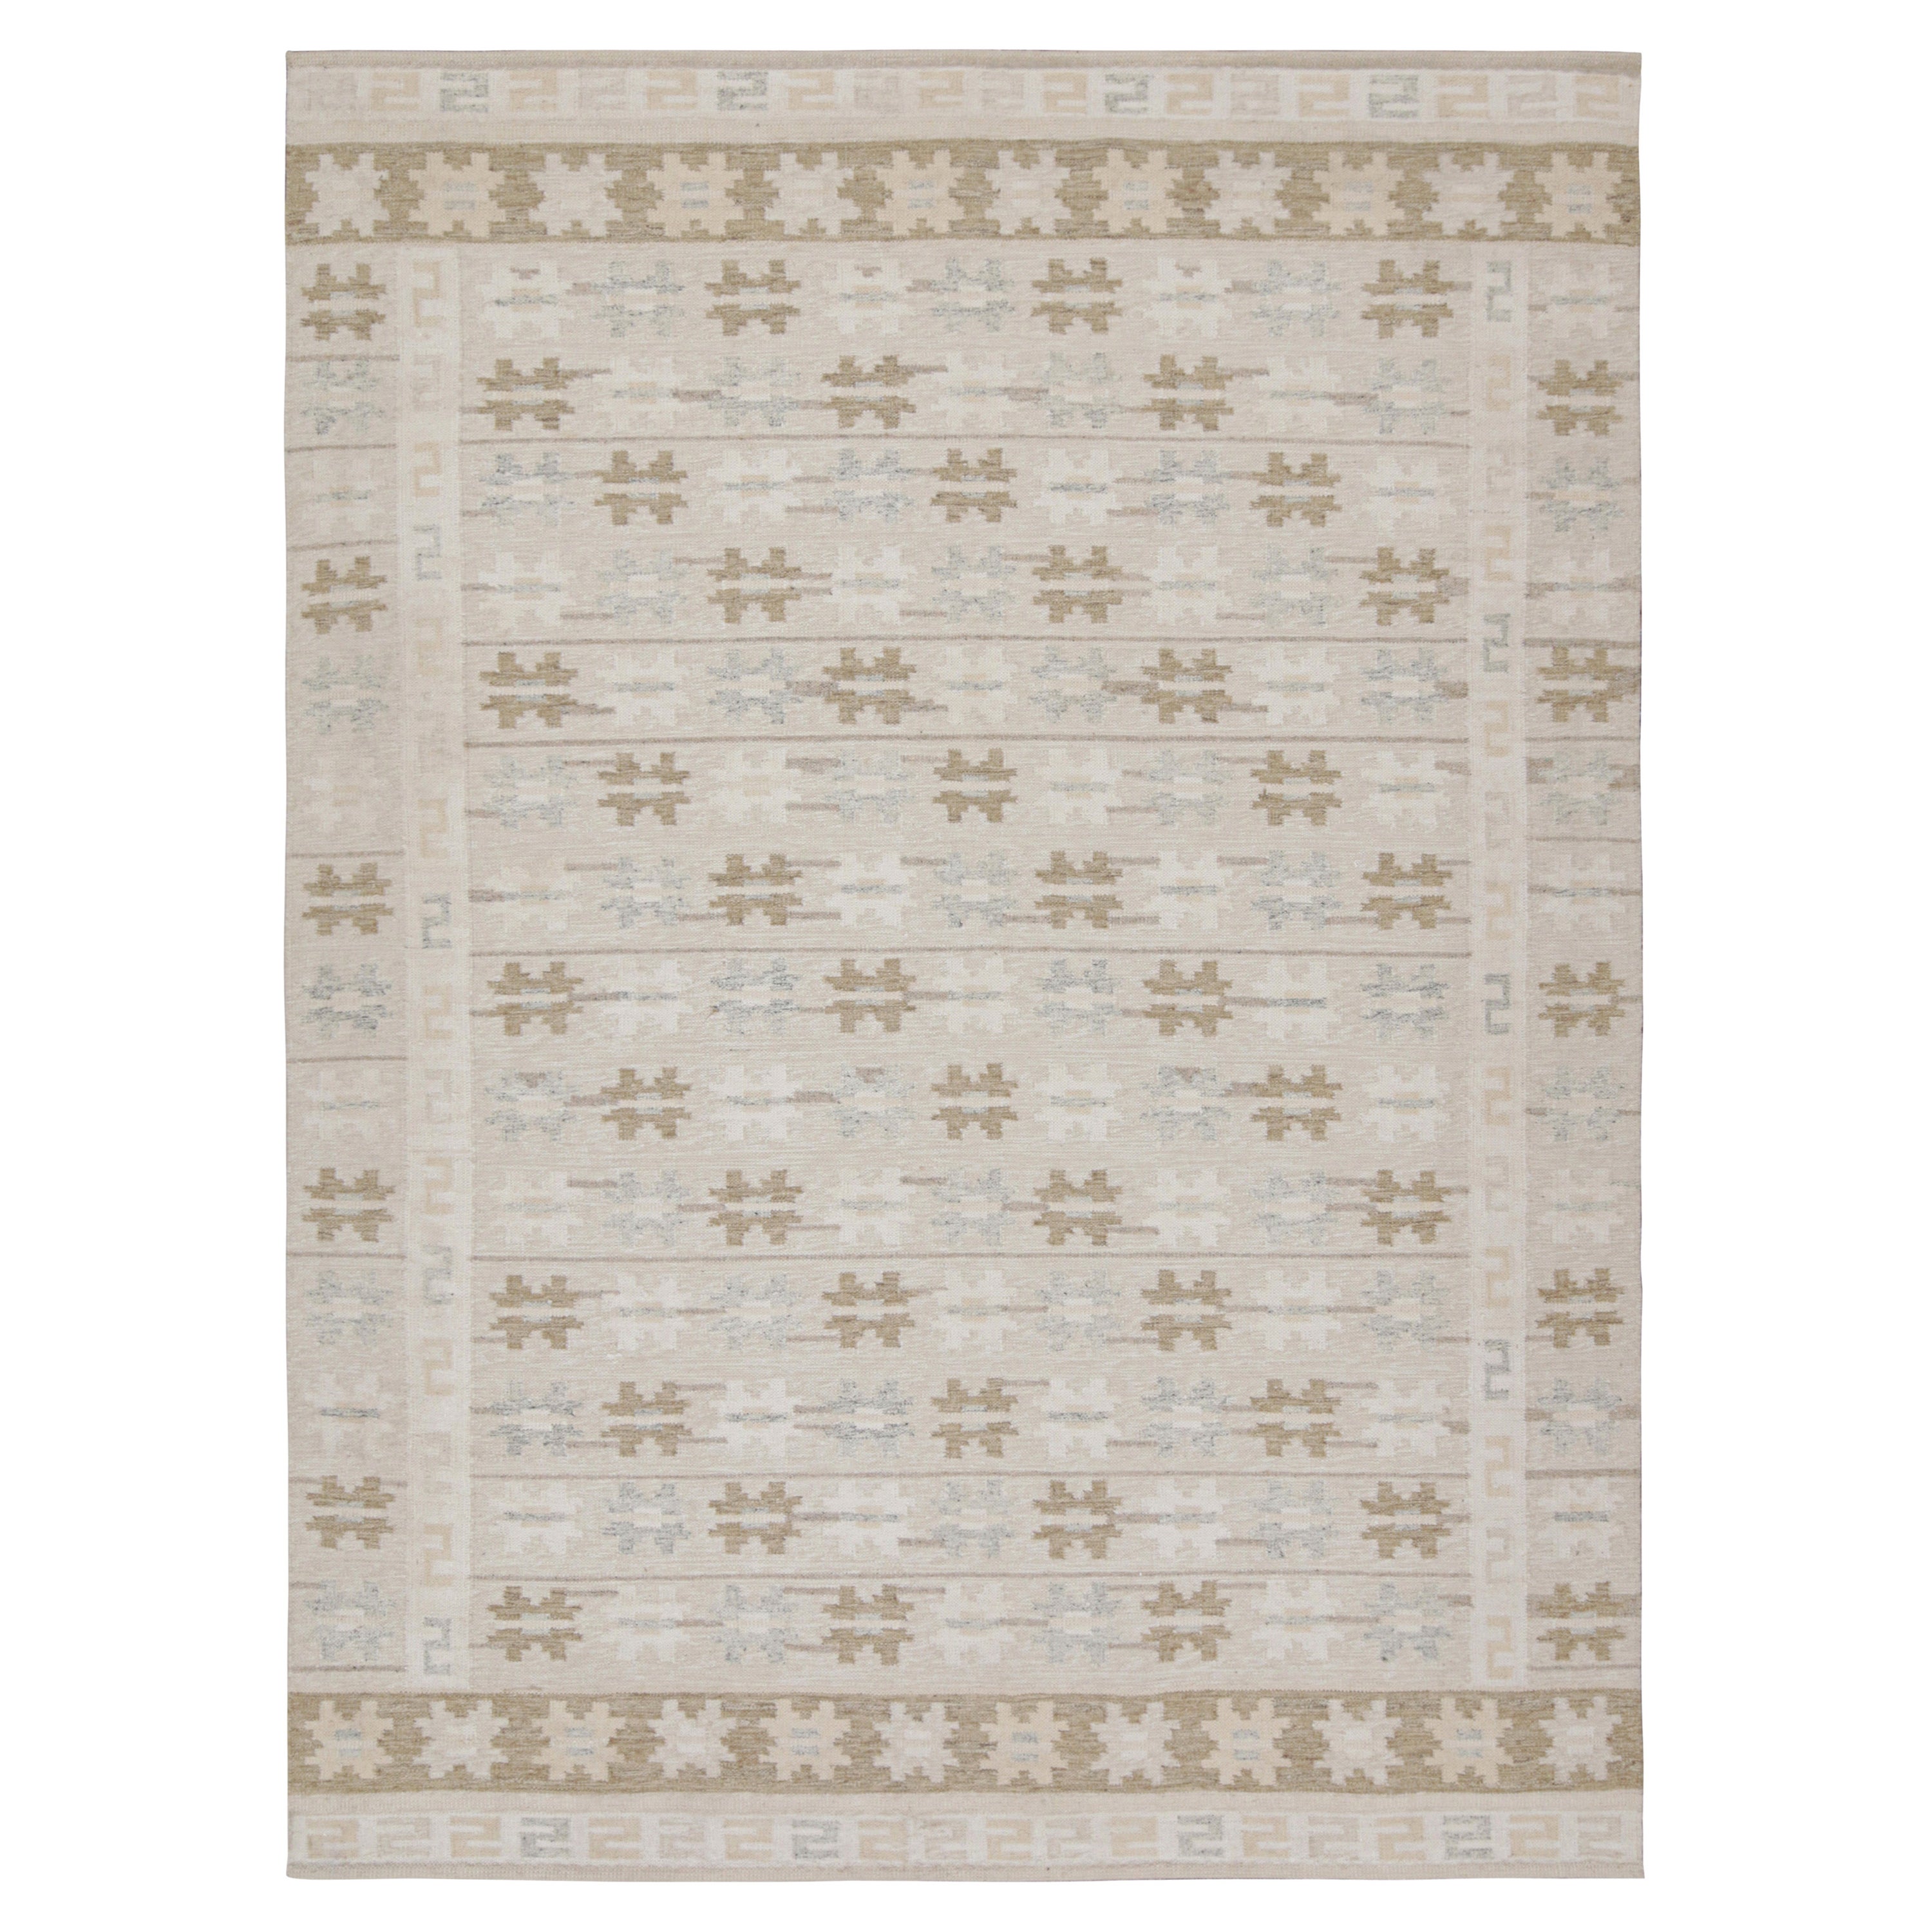 Rug & Kilim’s Scandinavian Style Kilim in Taupe & Beige-Brown Geometric Patterns For Sale